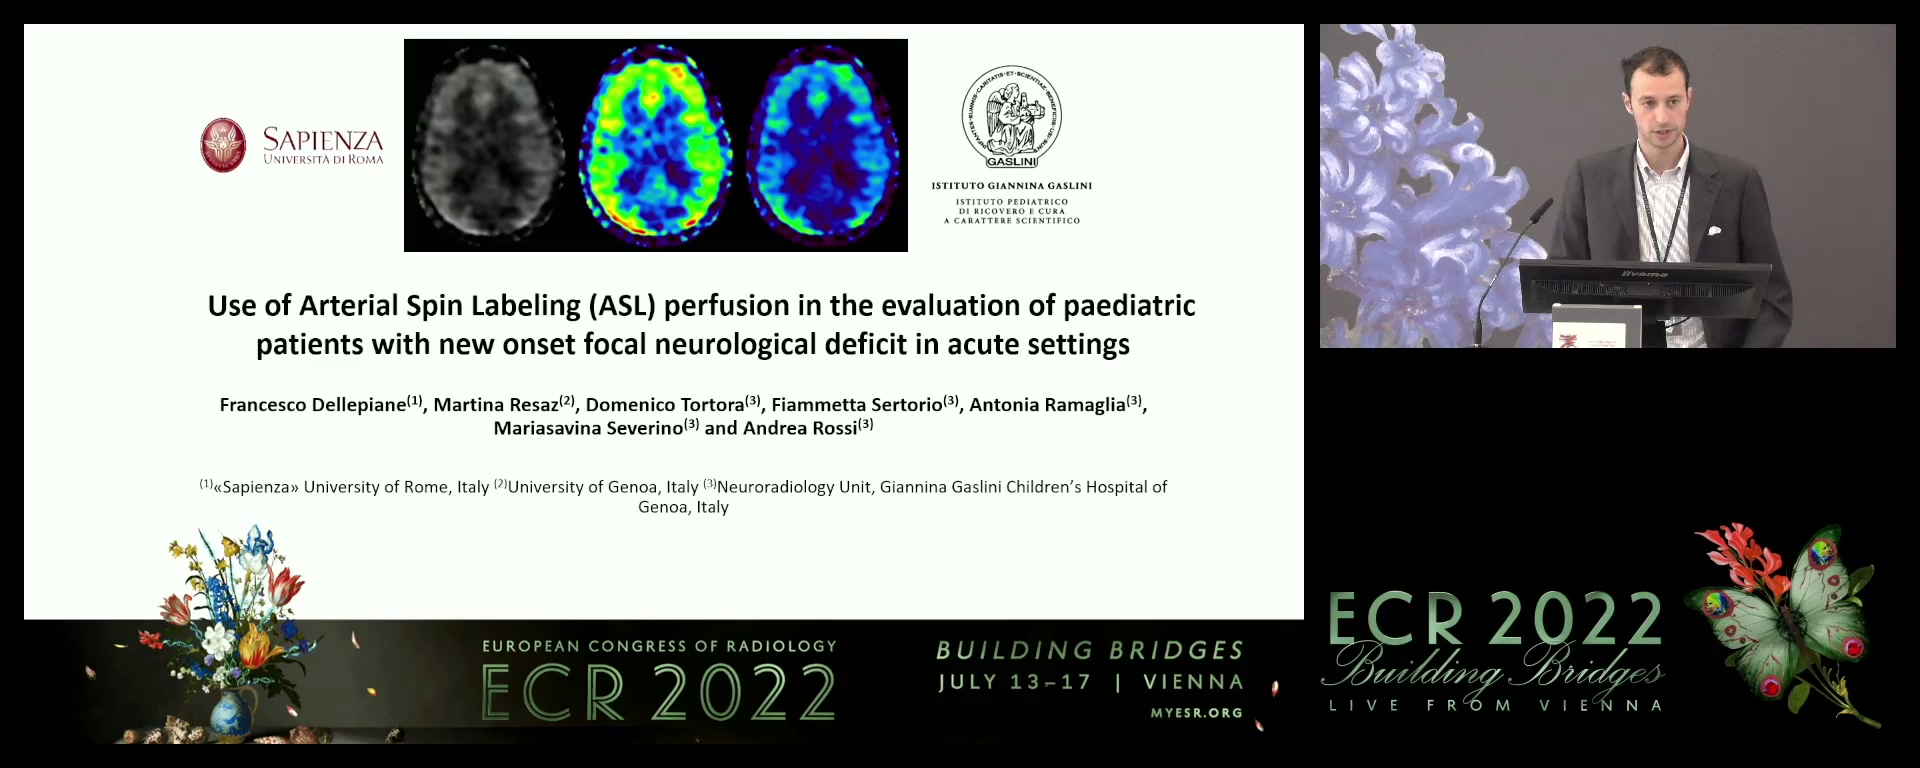 Use of arterial spin labelling (ASL) perfusion in the evaluation of paediatric patiens with new onset focal neurological deficit in acute settings - Francesco Dellepiane, Rome / IT